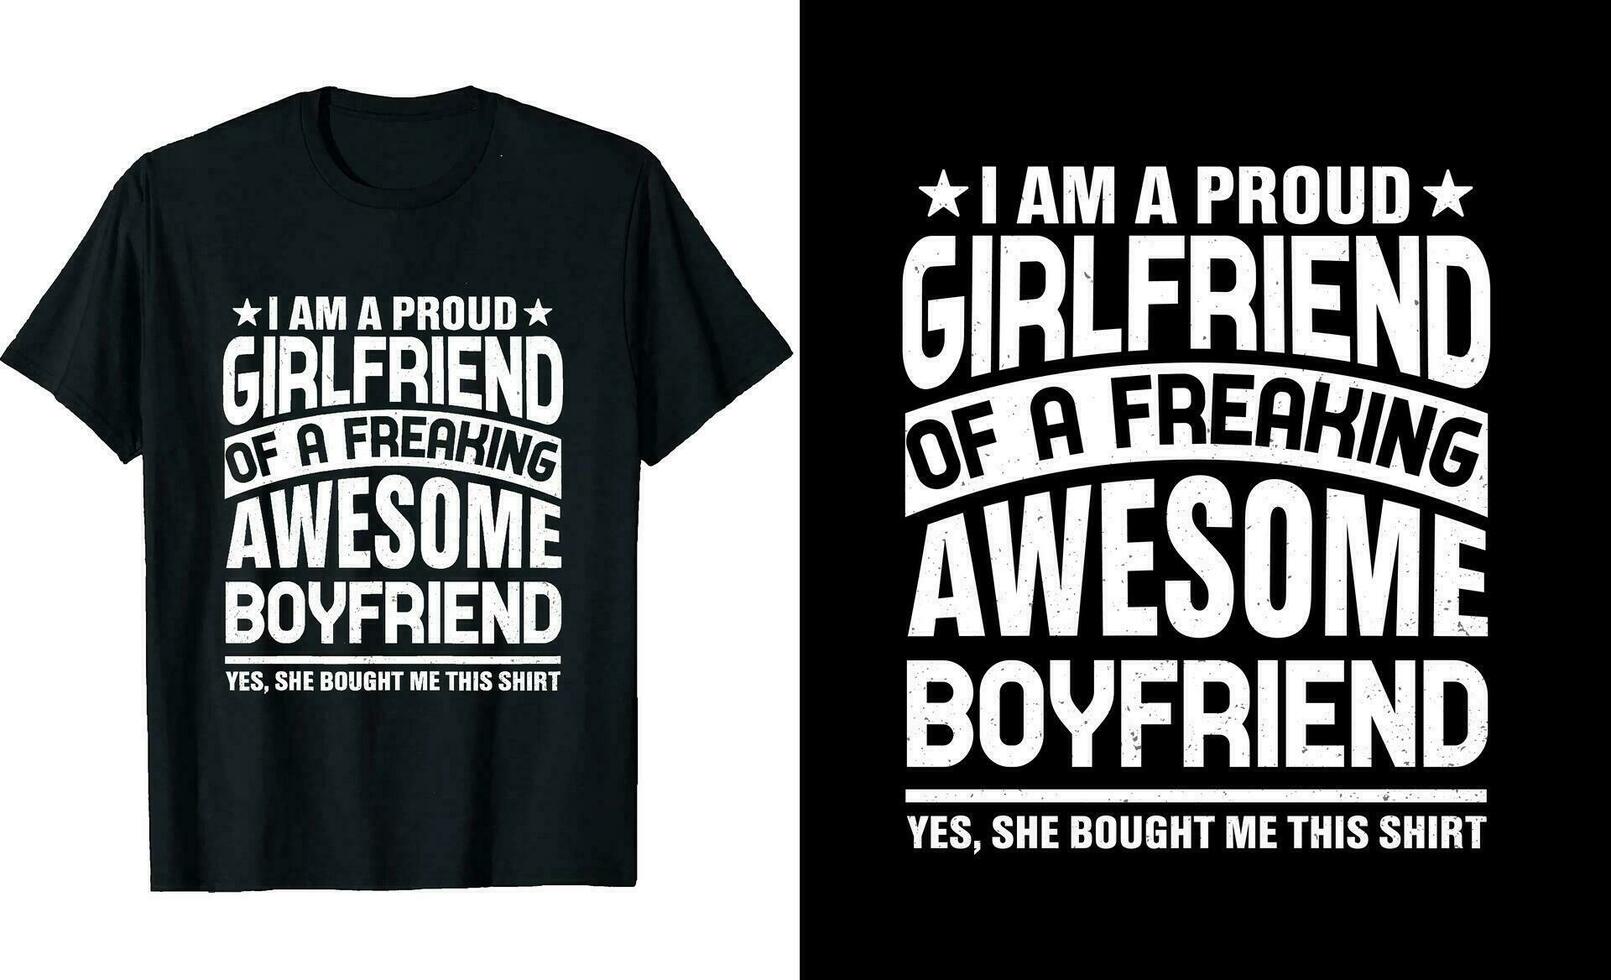 I'm a Proud Girlfriend of a Freaking Awesome Boyfriend or Girlfriend t shirt design or Boyfriend t shirt design vector